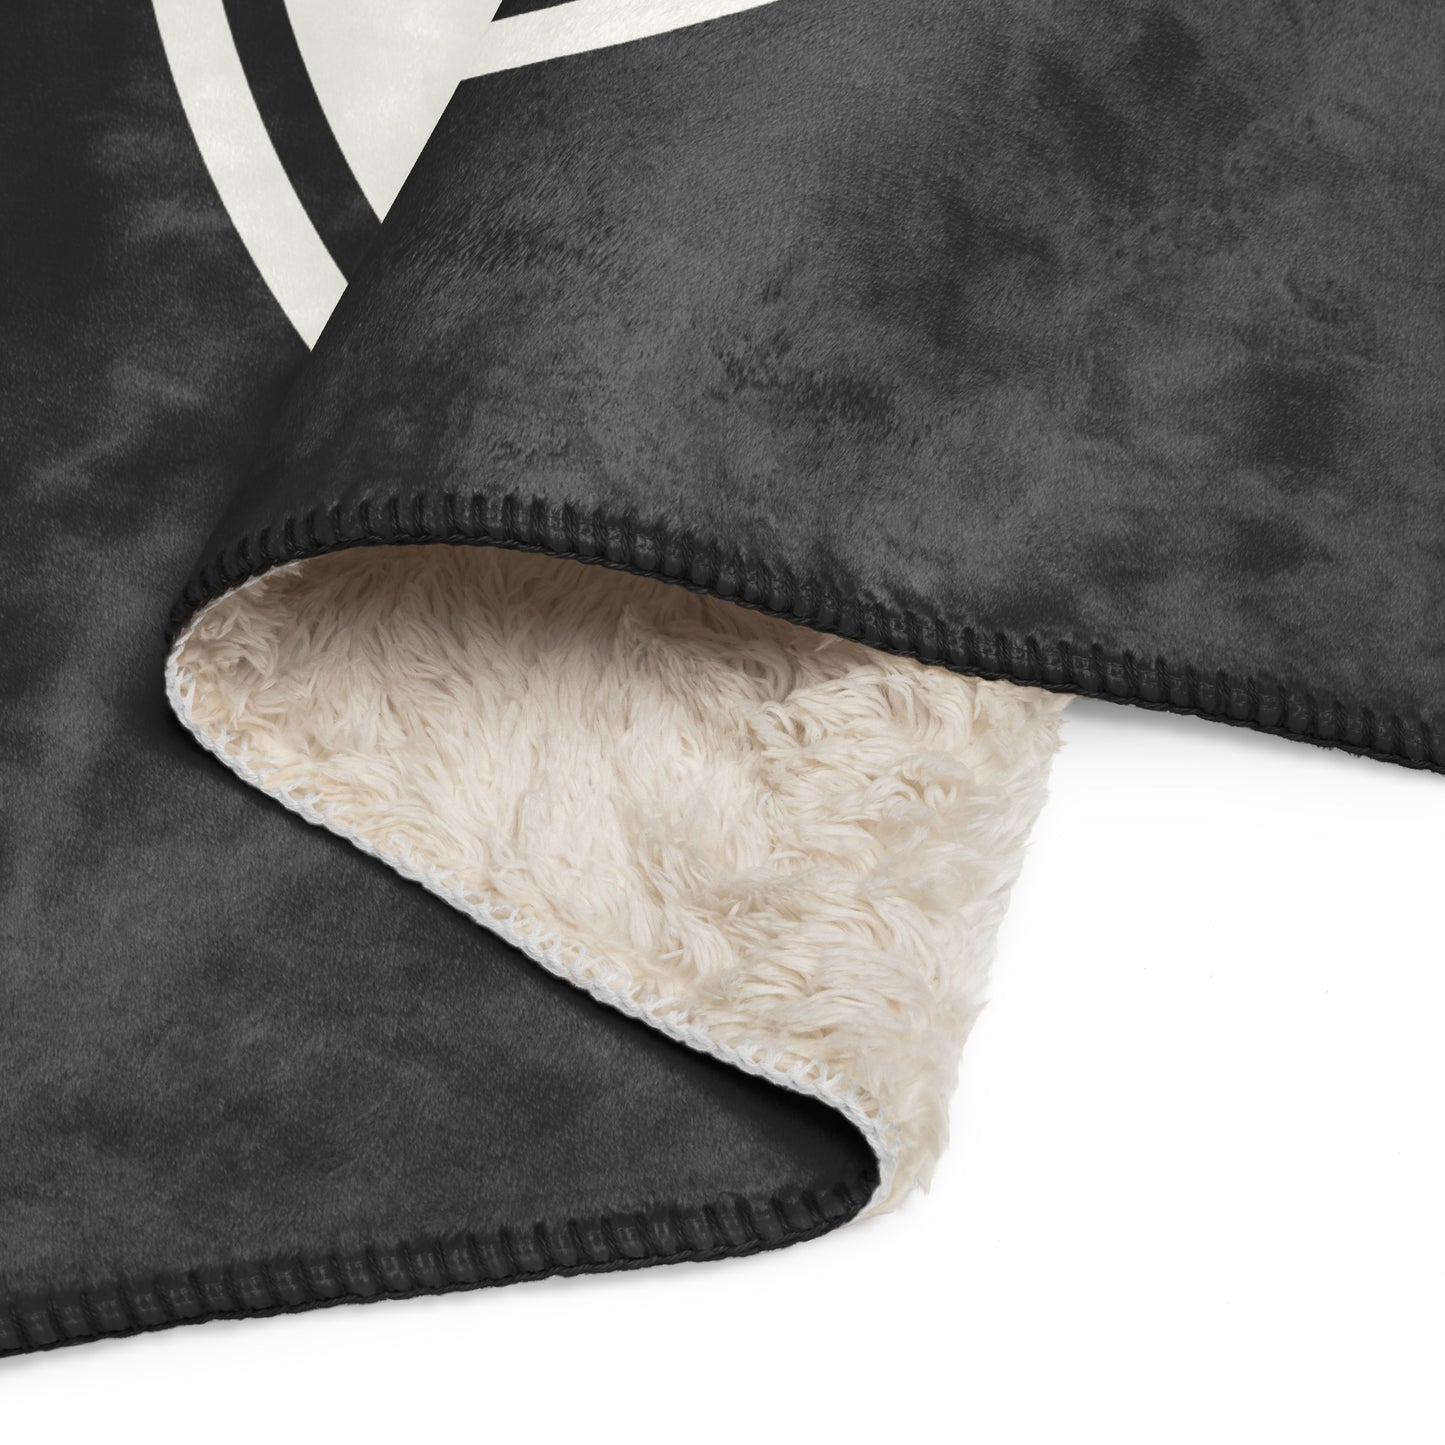 Unique Travel Gift Sherpa Blanket - White Oval • SVO Moscow • YHM Designs - Image 08